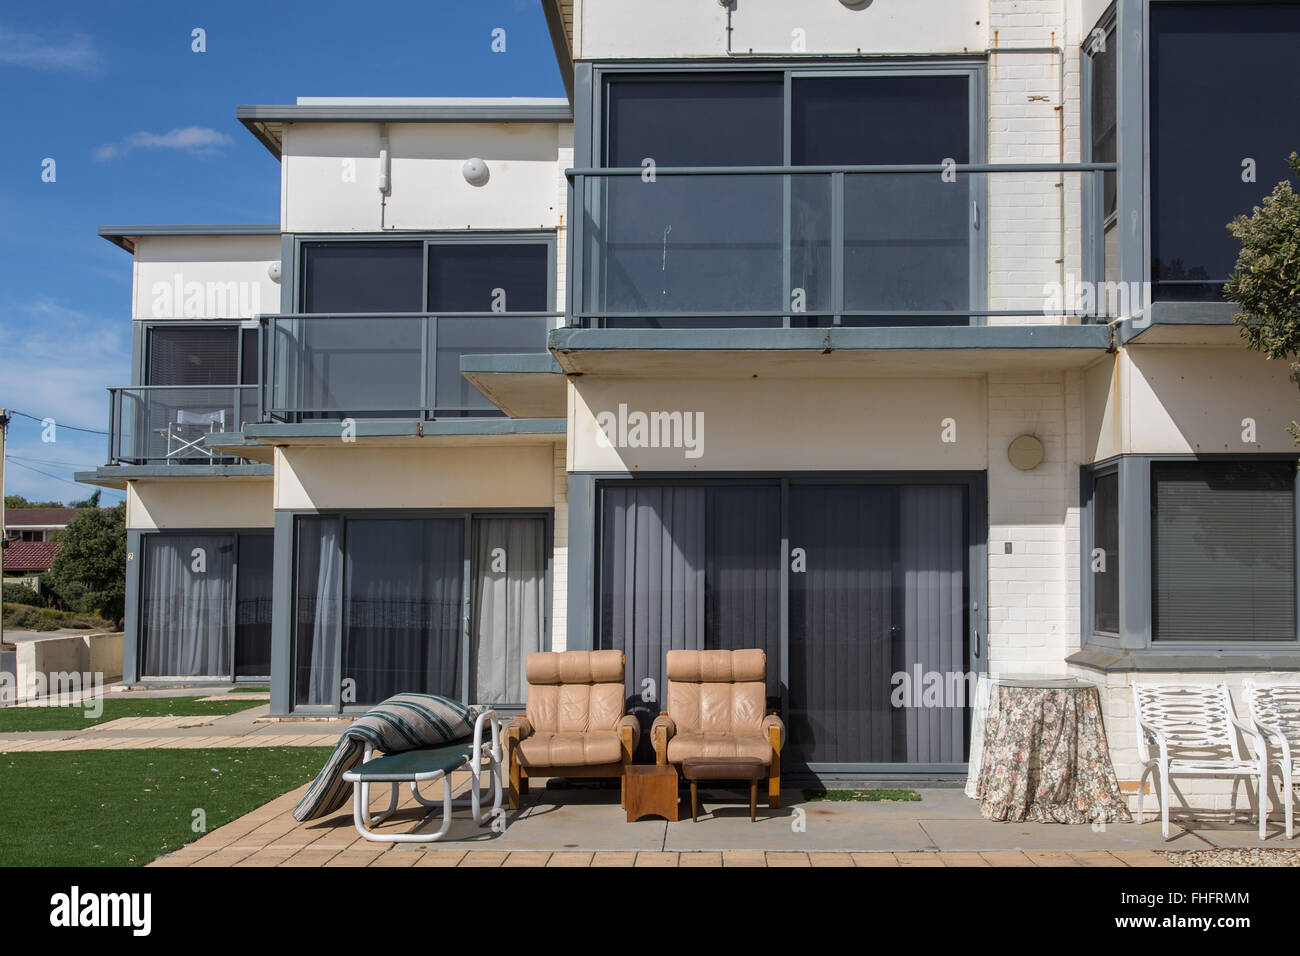 seaside apartments' terrace with furniture of different style exposed to sun, no occupants visible Stock Photo